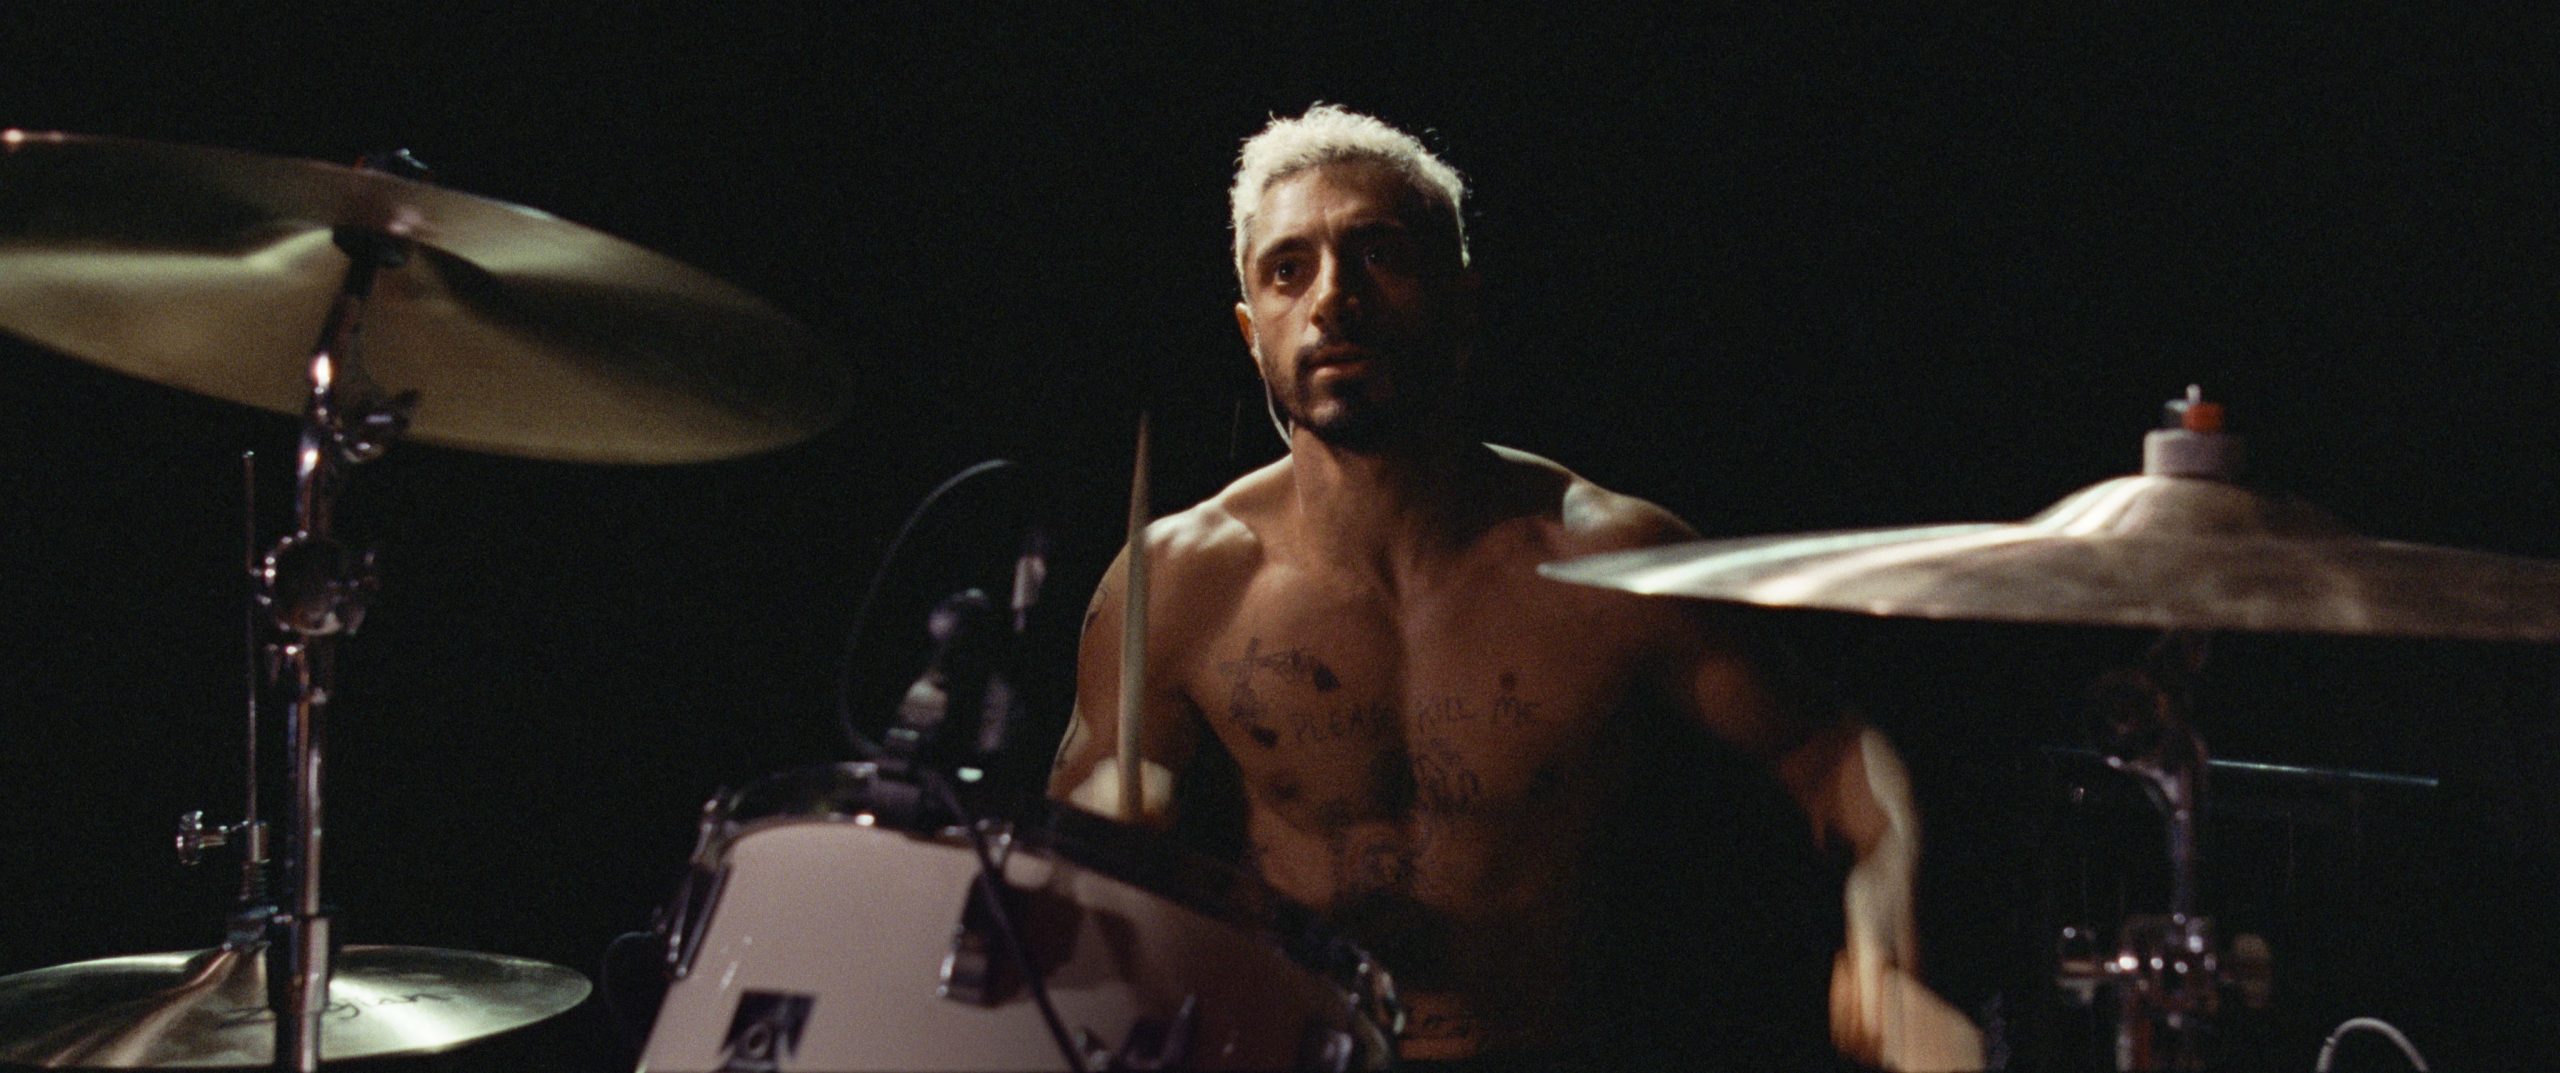 Image of Asian male playing drums, official photo from the film Sound of Metal